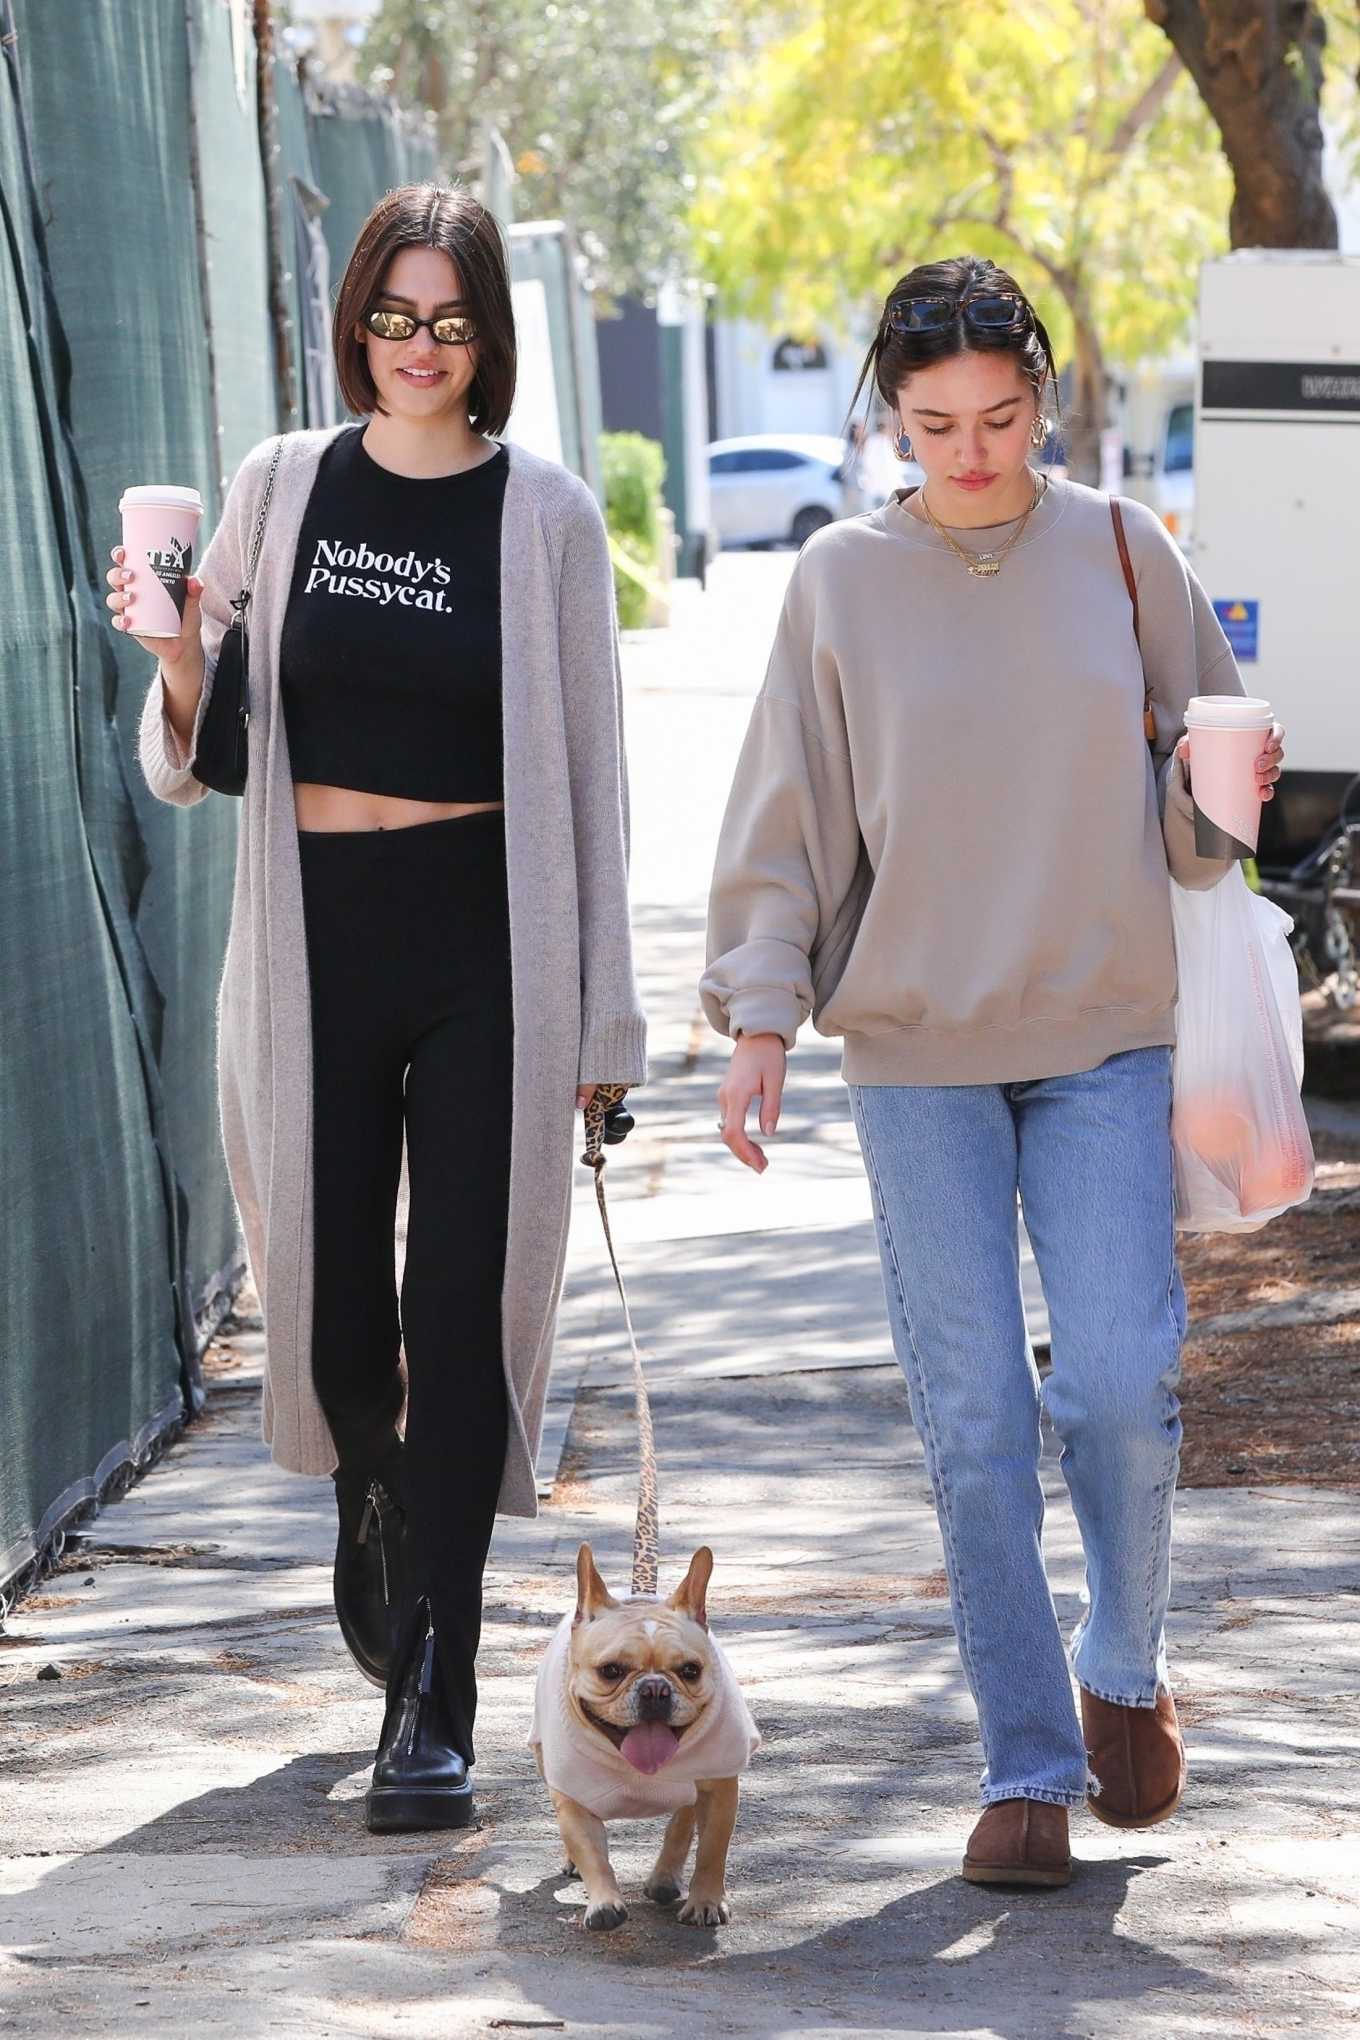 Amelia and Delilah Belle Hamlin â€“ Heading to Farmerâ€™s Market with their dog in Los Angeles